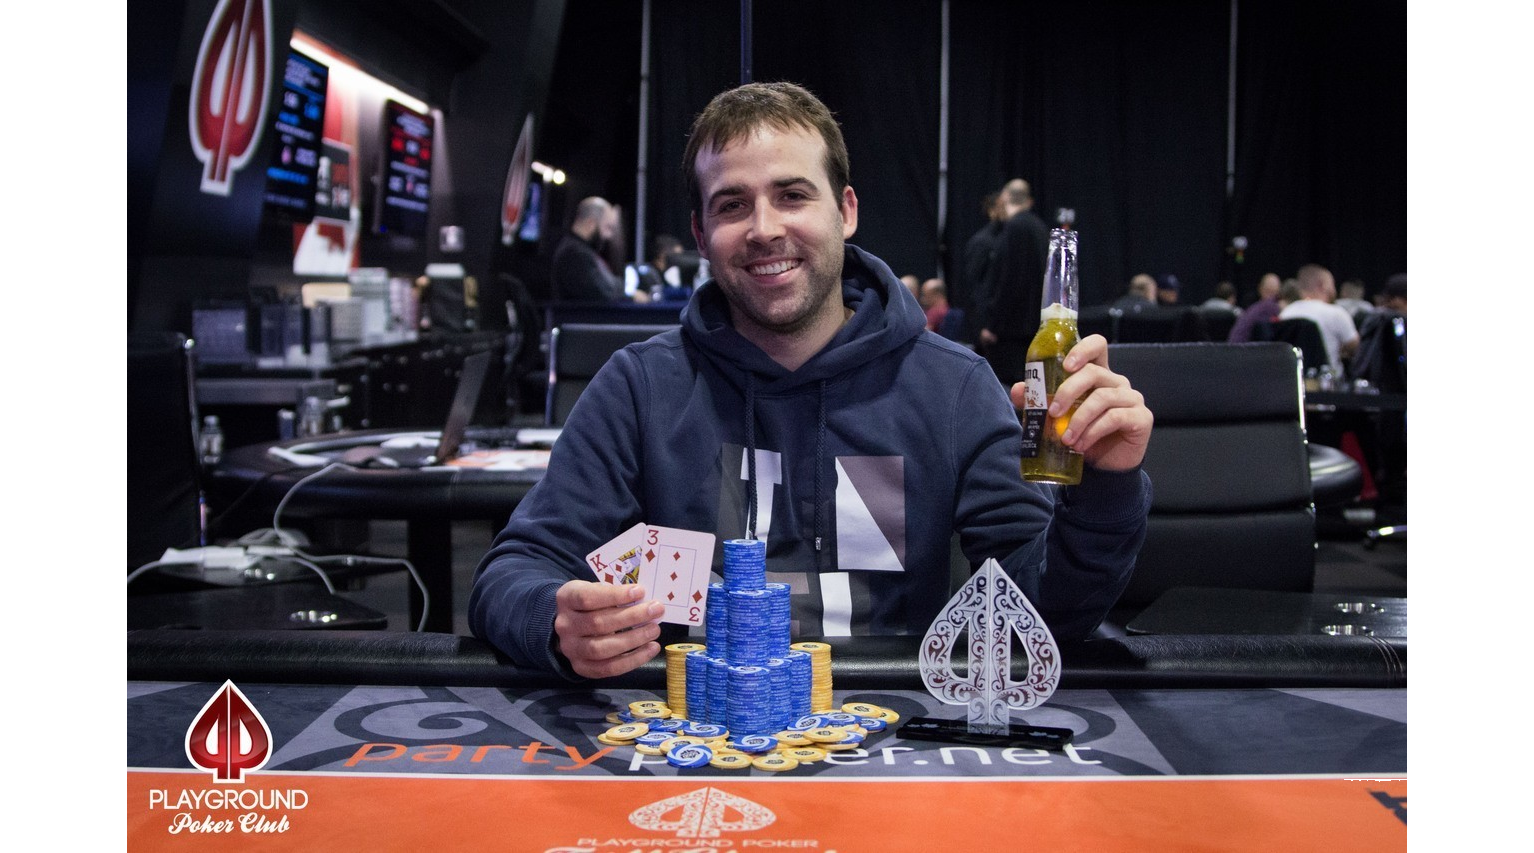 Lefrançois Crowned Champion of the High Roller